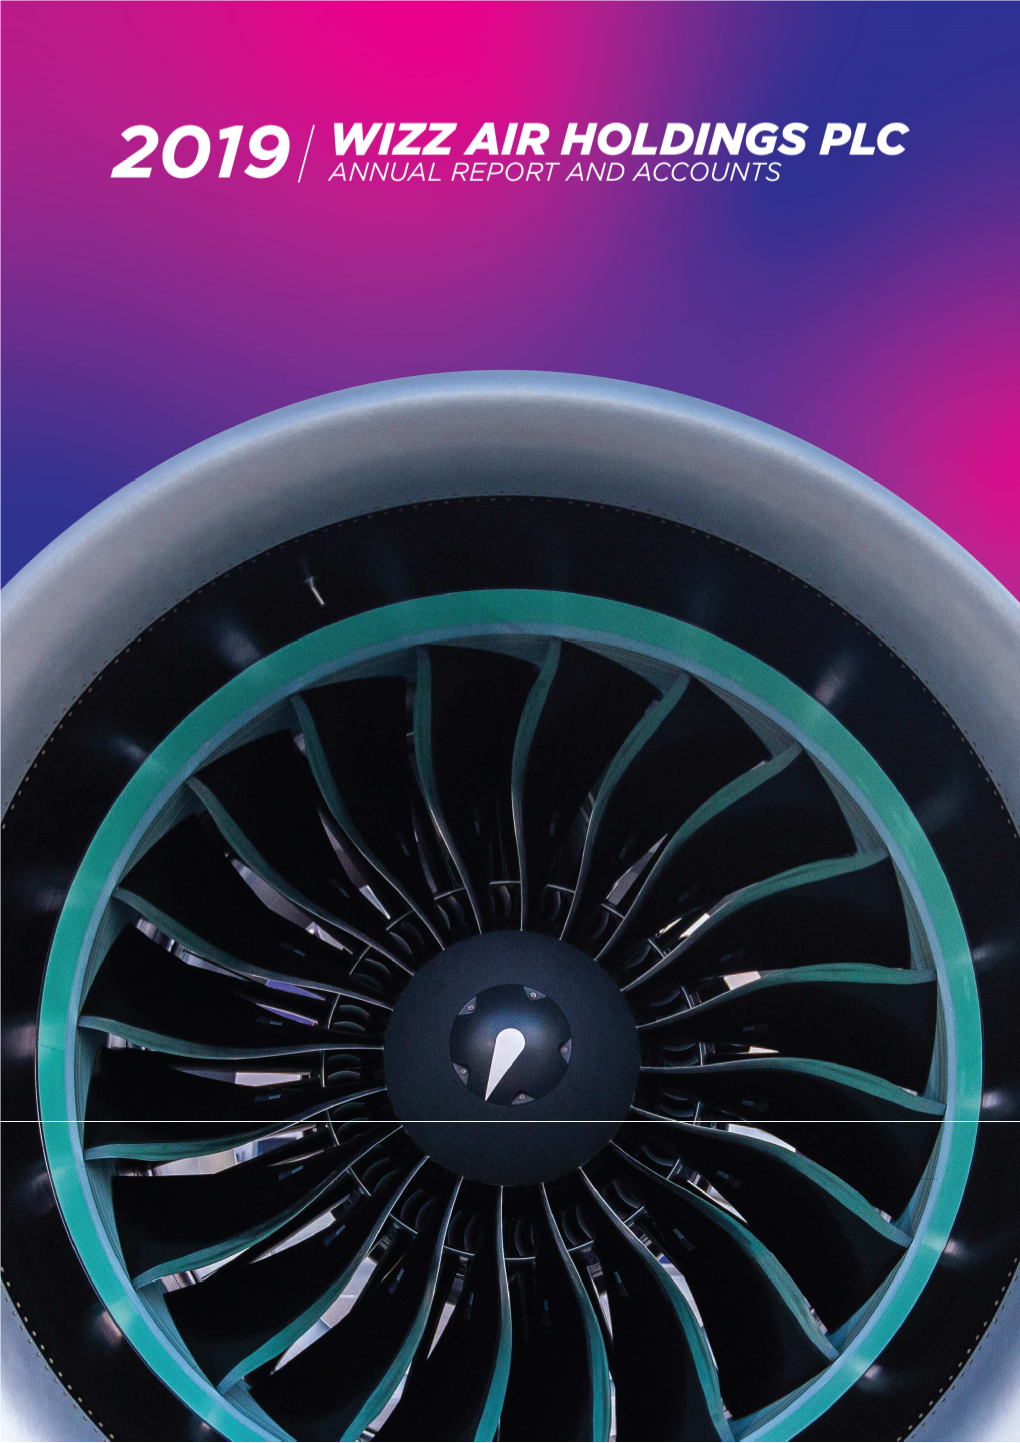 Wizz Air Holdings Plc Annual Report and Accounts 2019 2